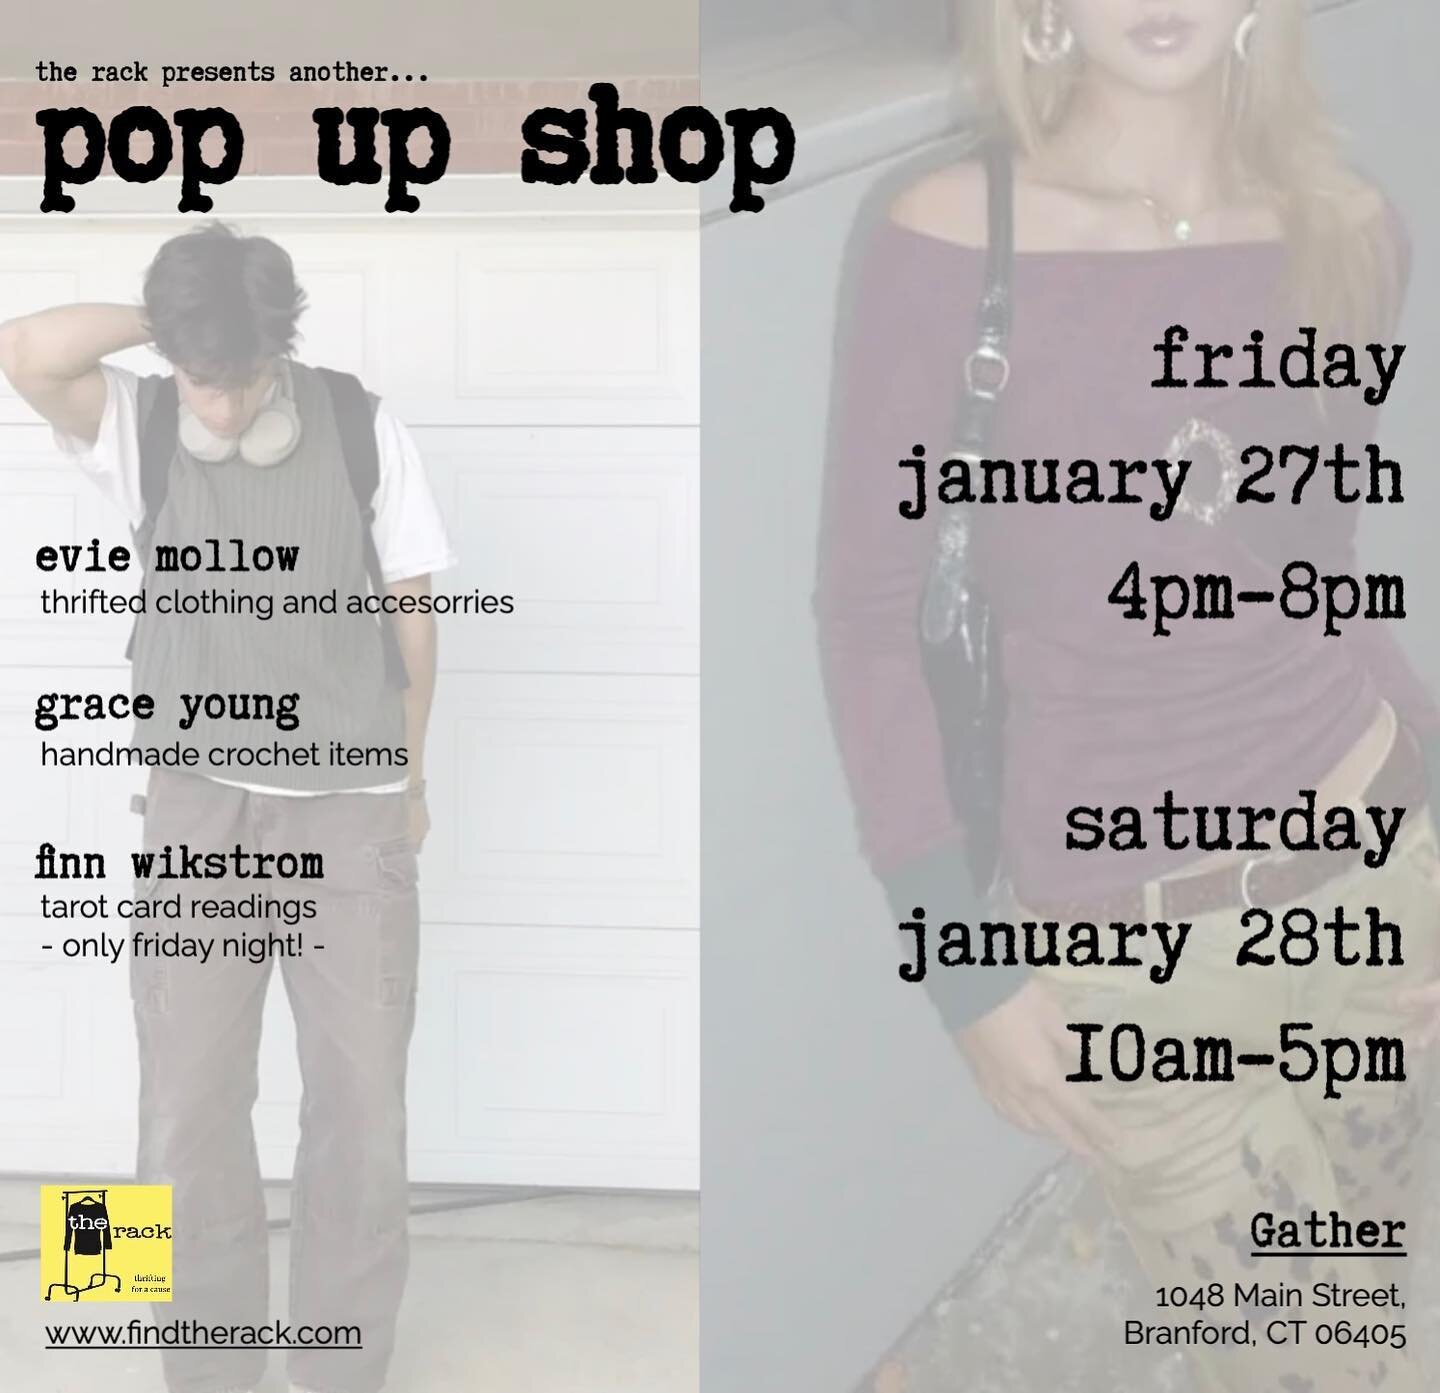 The Rack presents another pop up shop at Gather in Branford! Y&rsquo;all better be excited because it&rsquo;s all new clothes 😊😊 last weekend of January!